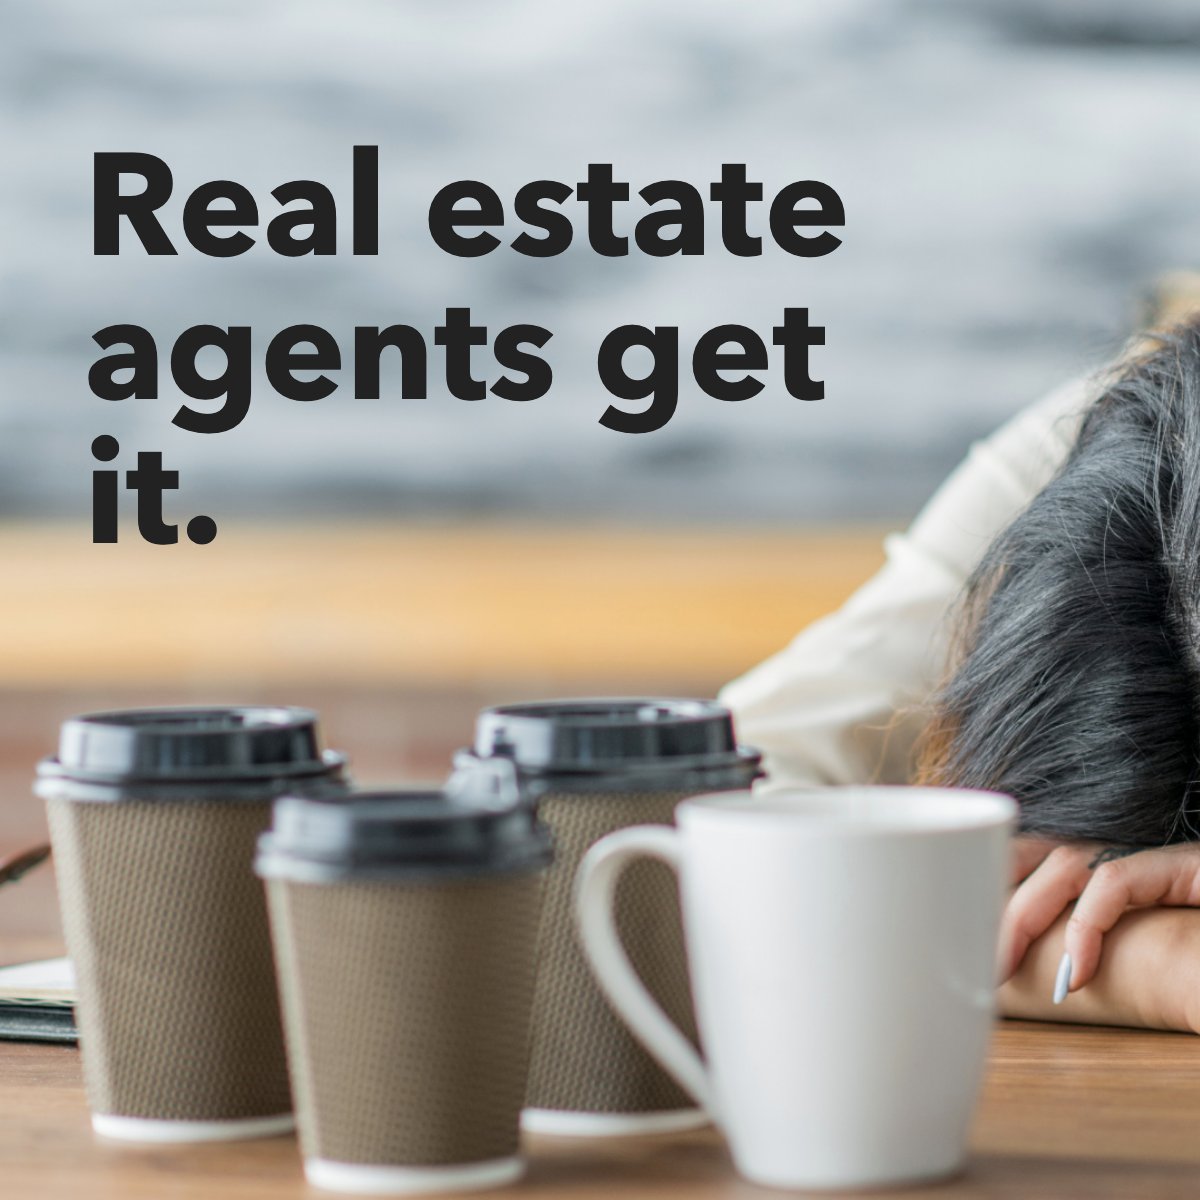 A real estate agent will usually sell your house for much more money than if you sold it yourself. 😮

They are worth it! 🌟

#realestateinvestment #realestateagents #realtor #realestate #realestateservices #realestatebrokerage